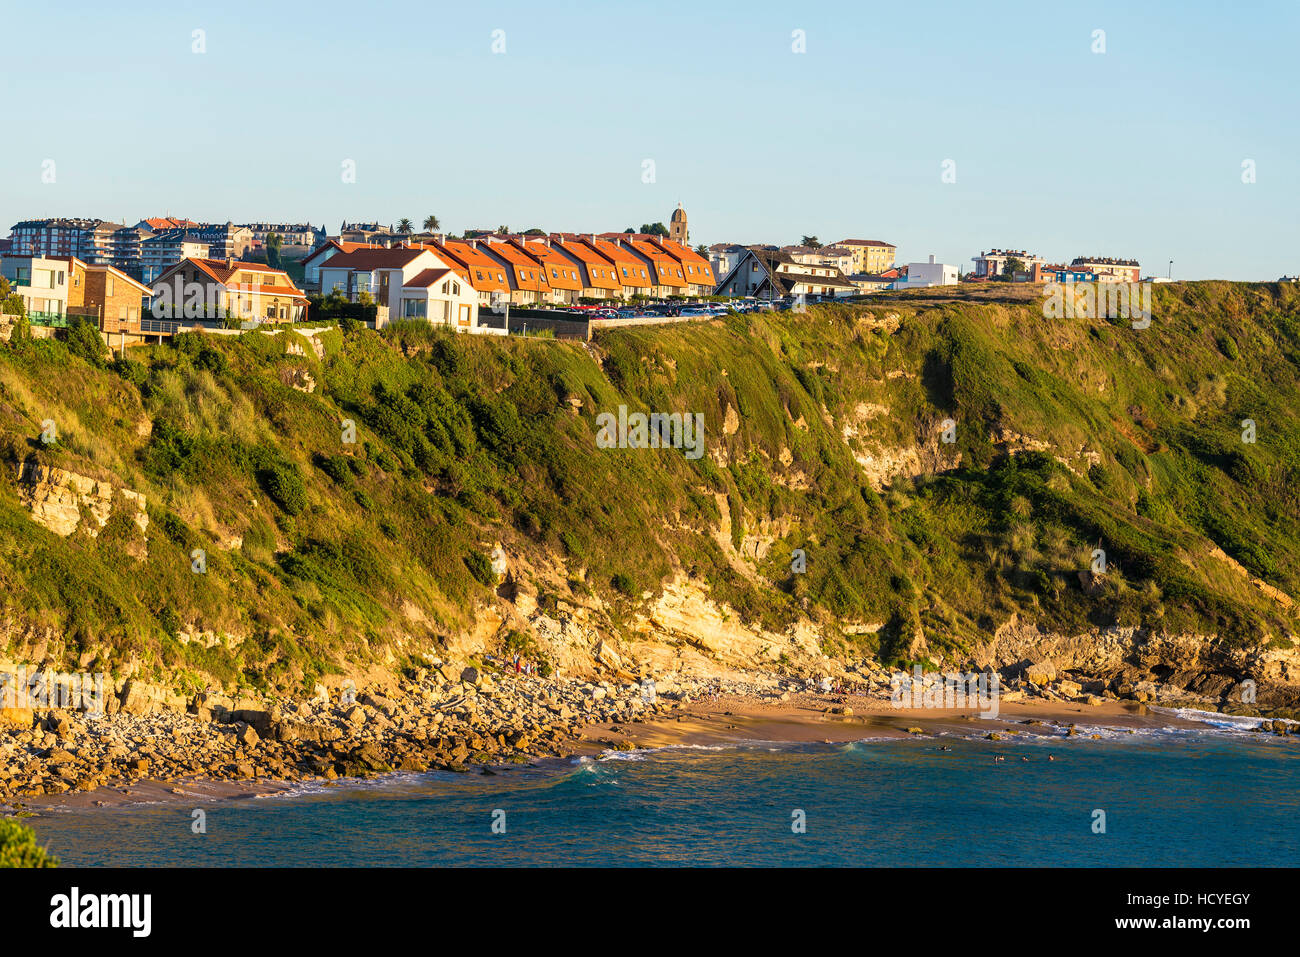 Los Locos beach with people bathing in the Atlantic Ocean in Cantabria, Spain Stock Photo